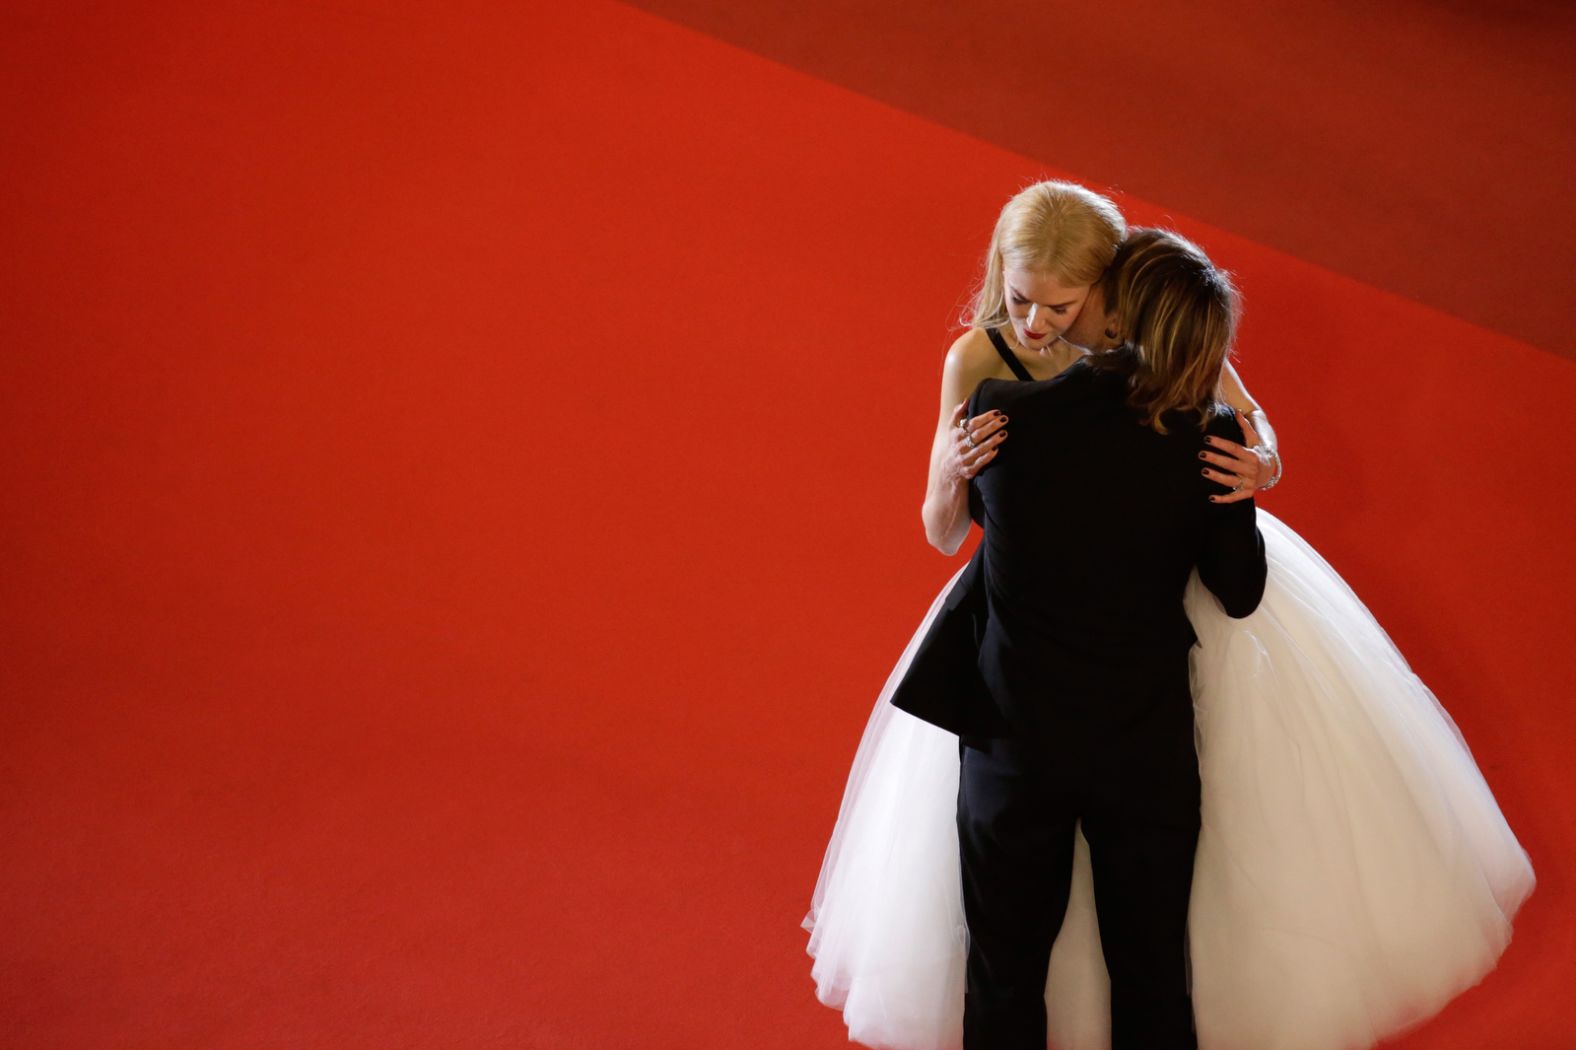 Kidman and Urban embrace on the red carpet at the Cannes Film Festival in 2017.